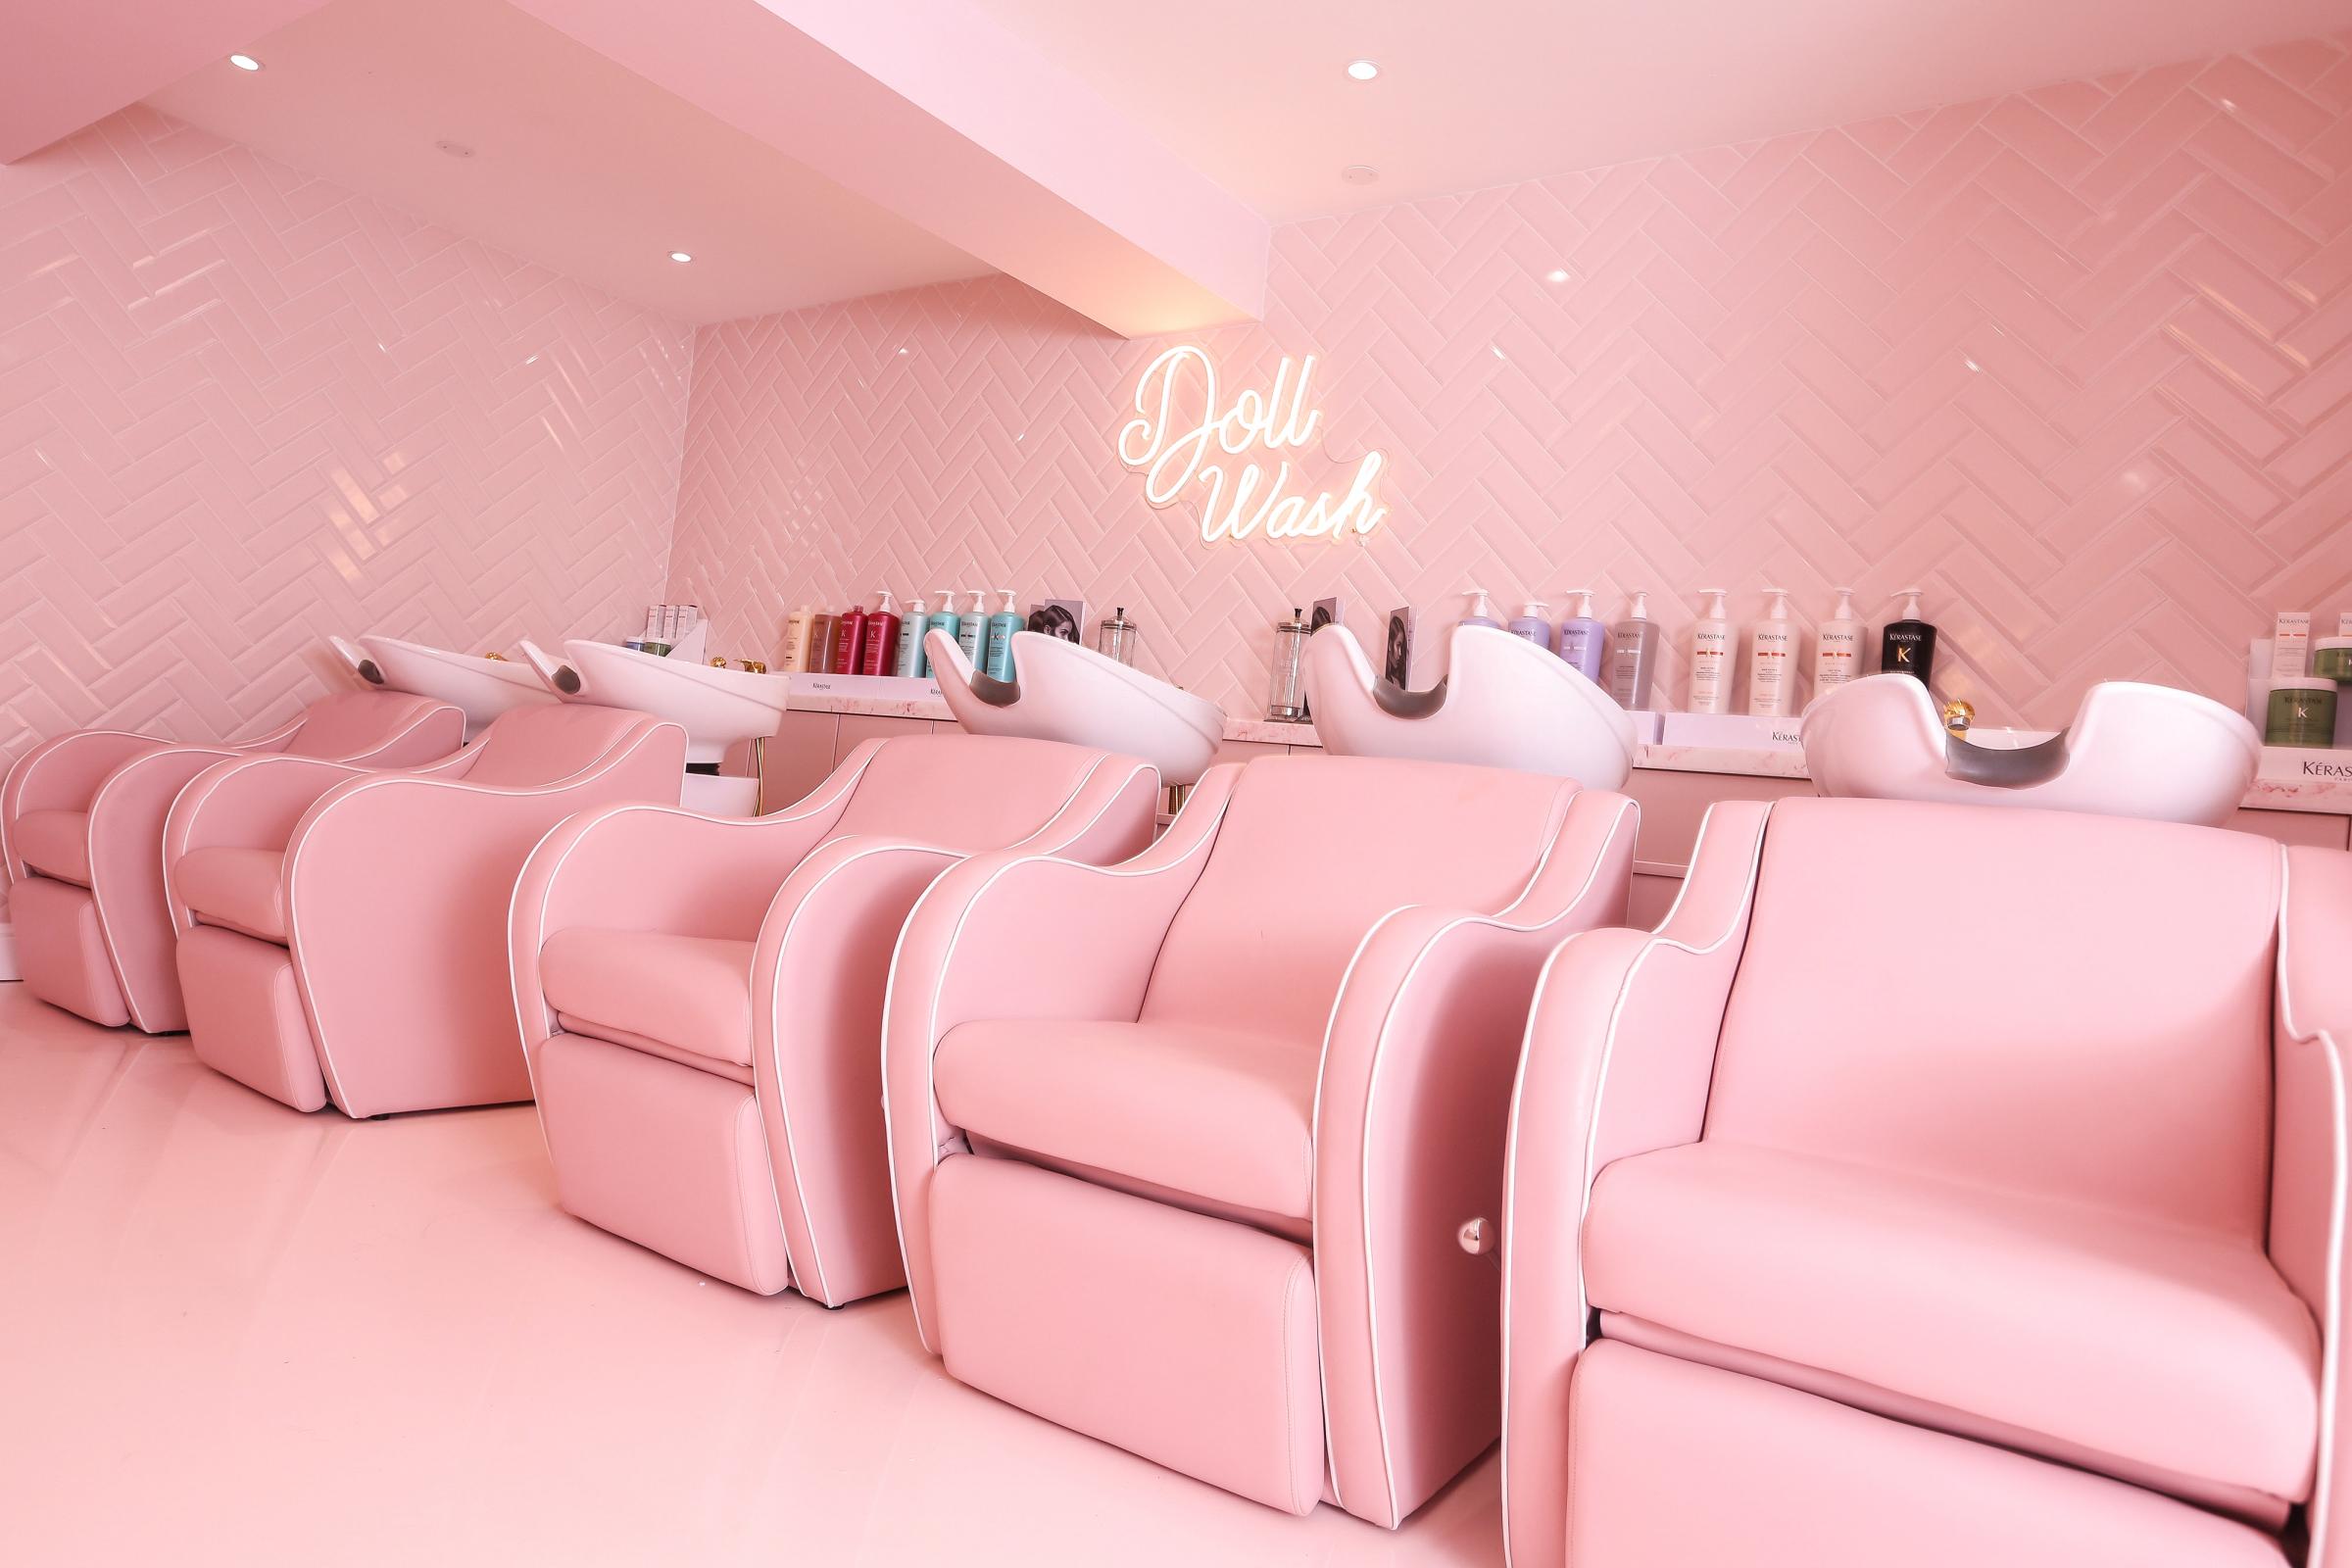 The Doll Beauty HQ salon in Boughton, Chester.